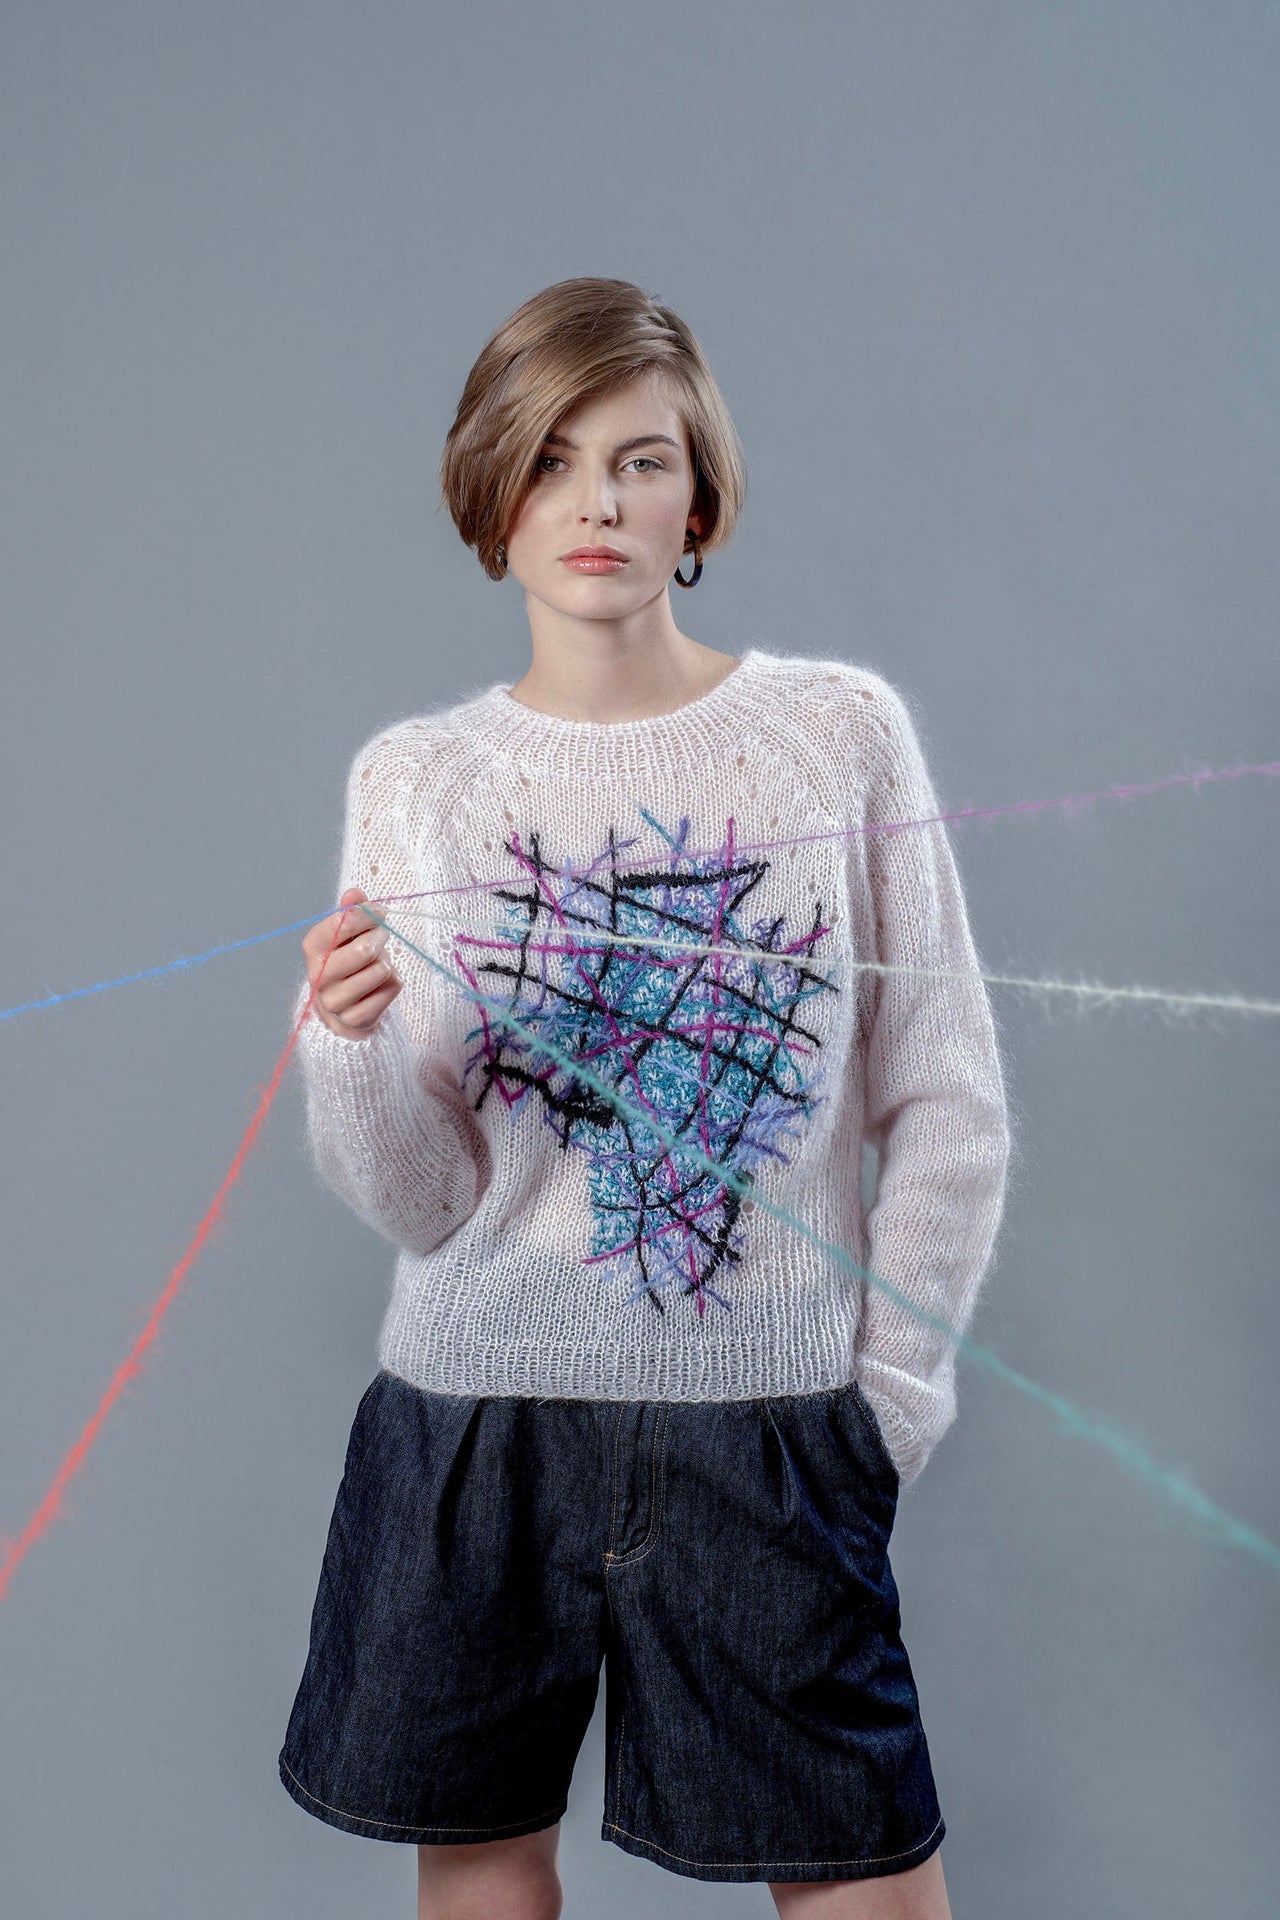 Woman wearing light pink mohair sweater and holding wool yarns going towards camera. The sweater has colourful embroidered lines forming an abstract shape in the center. 